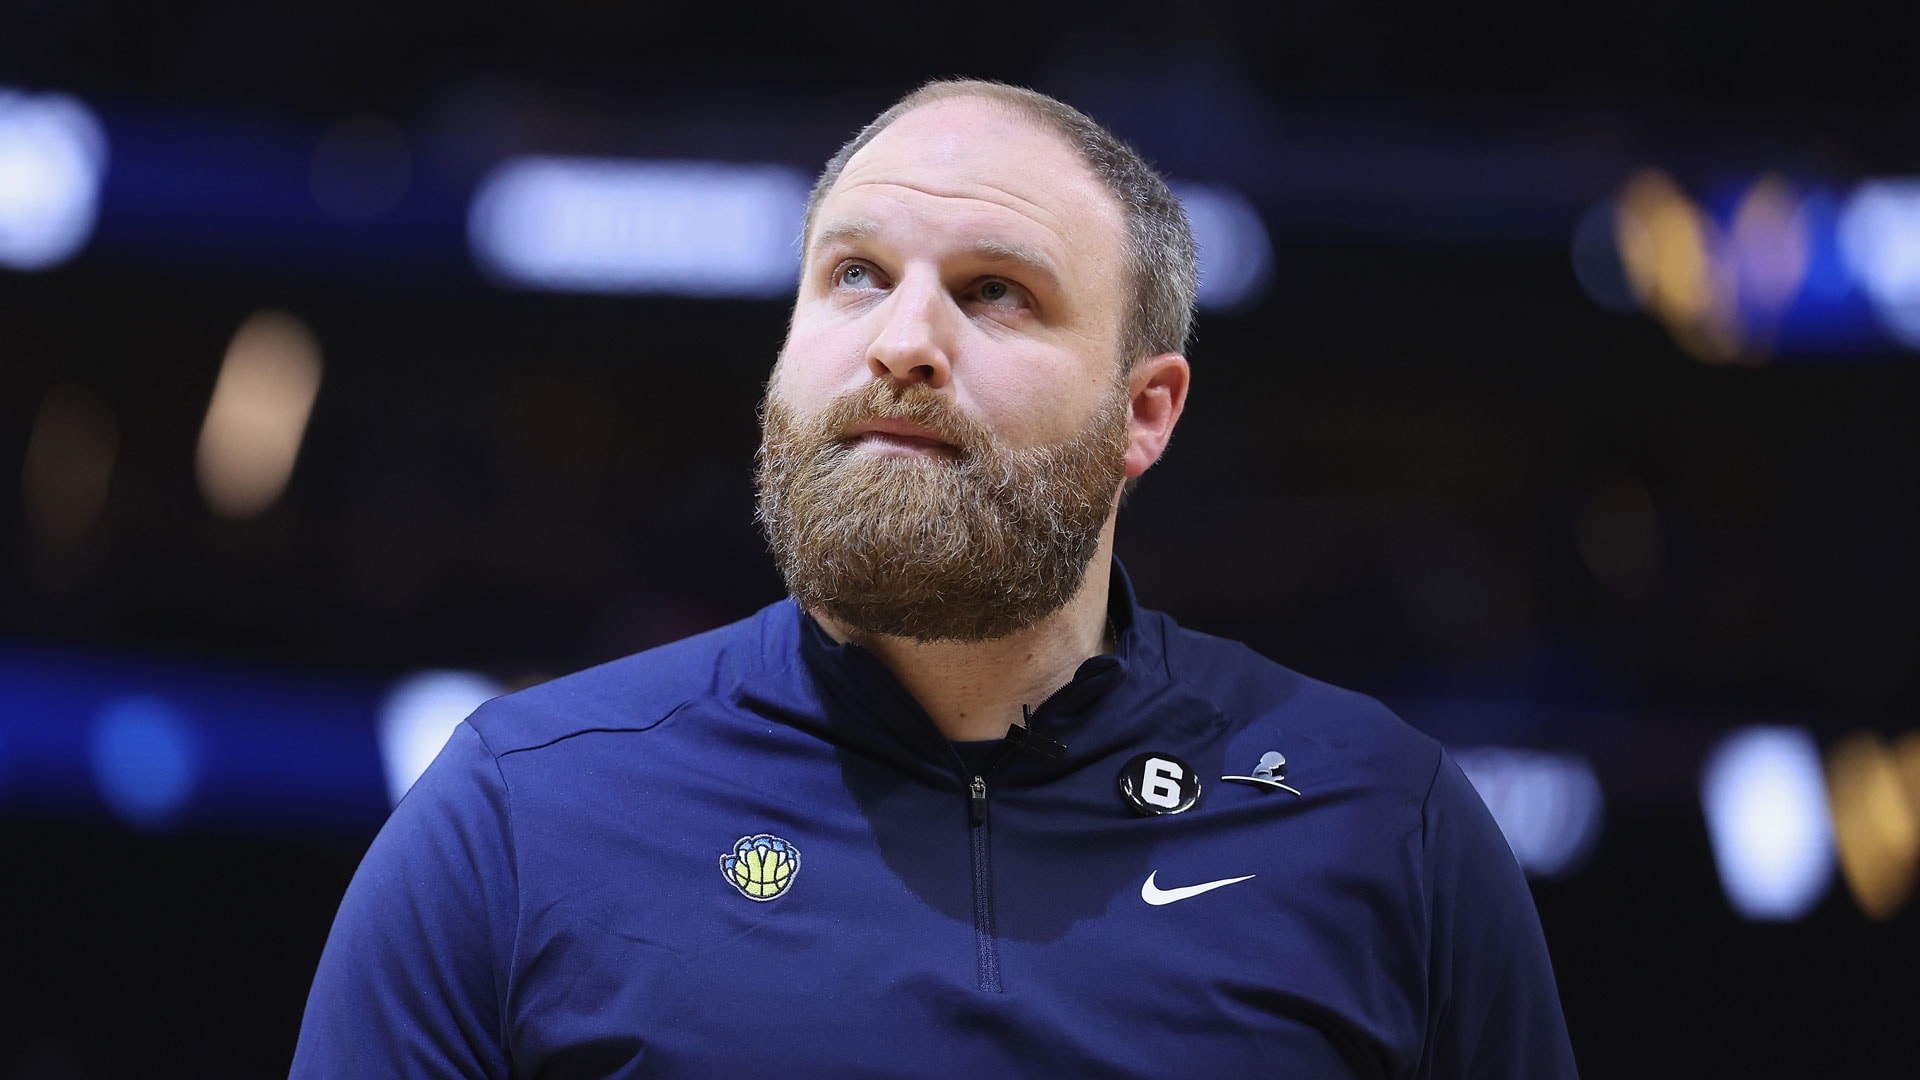 SAN FRANCISCO, CALIFORNIA - JANUARY 25: Memphis Grizzlies head coach Taylor Jenkins on during the game against the Golden State Warriors at Chase Center on January 25, 2023 in San Francisco, California.